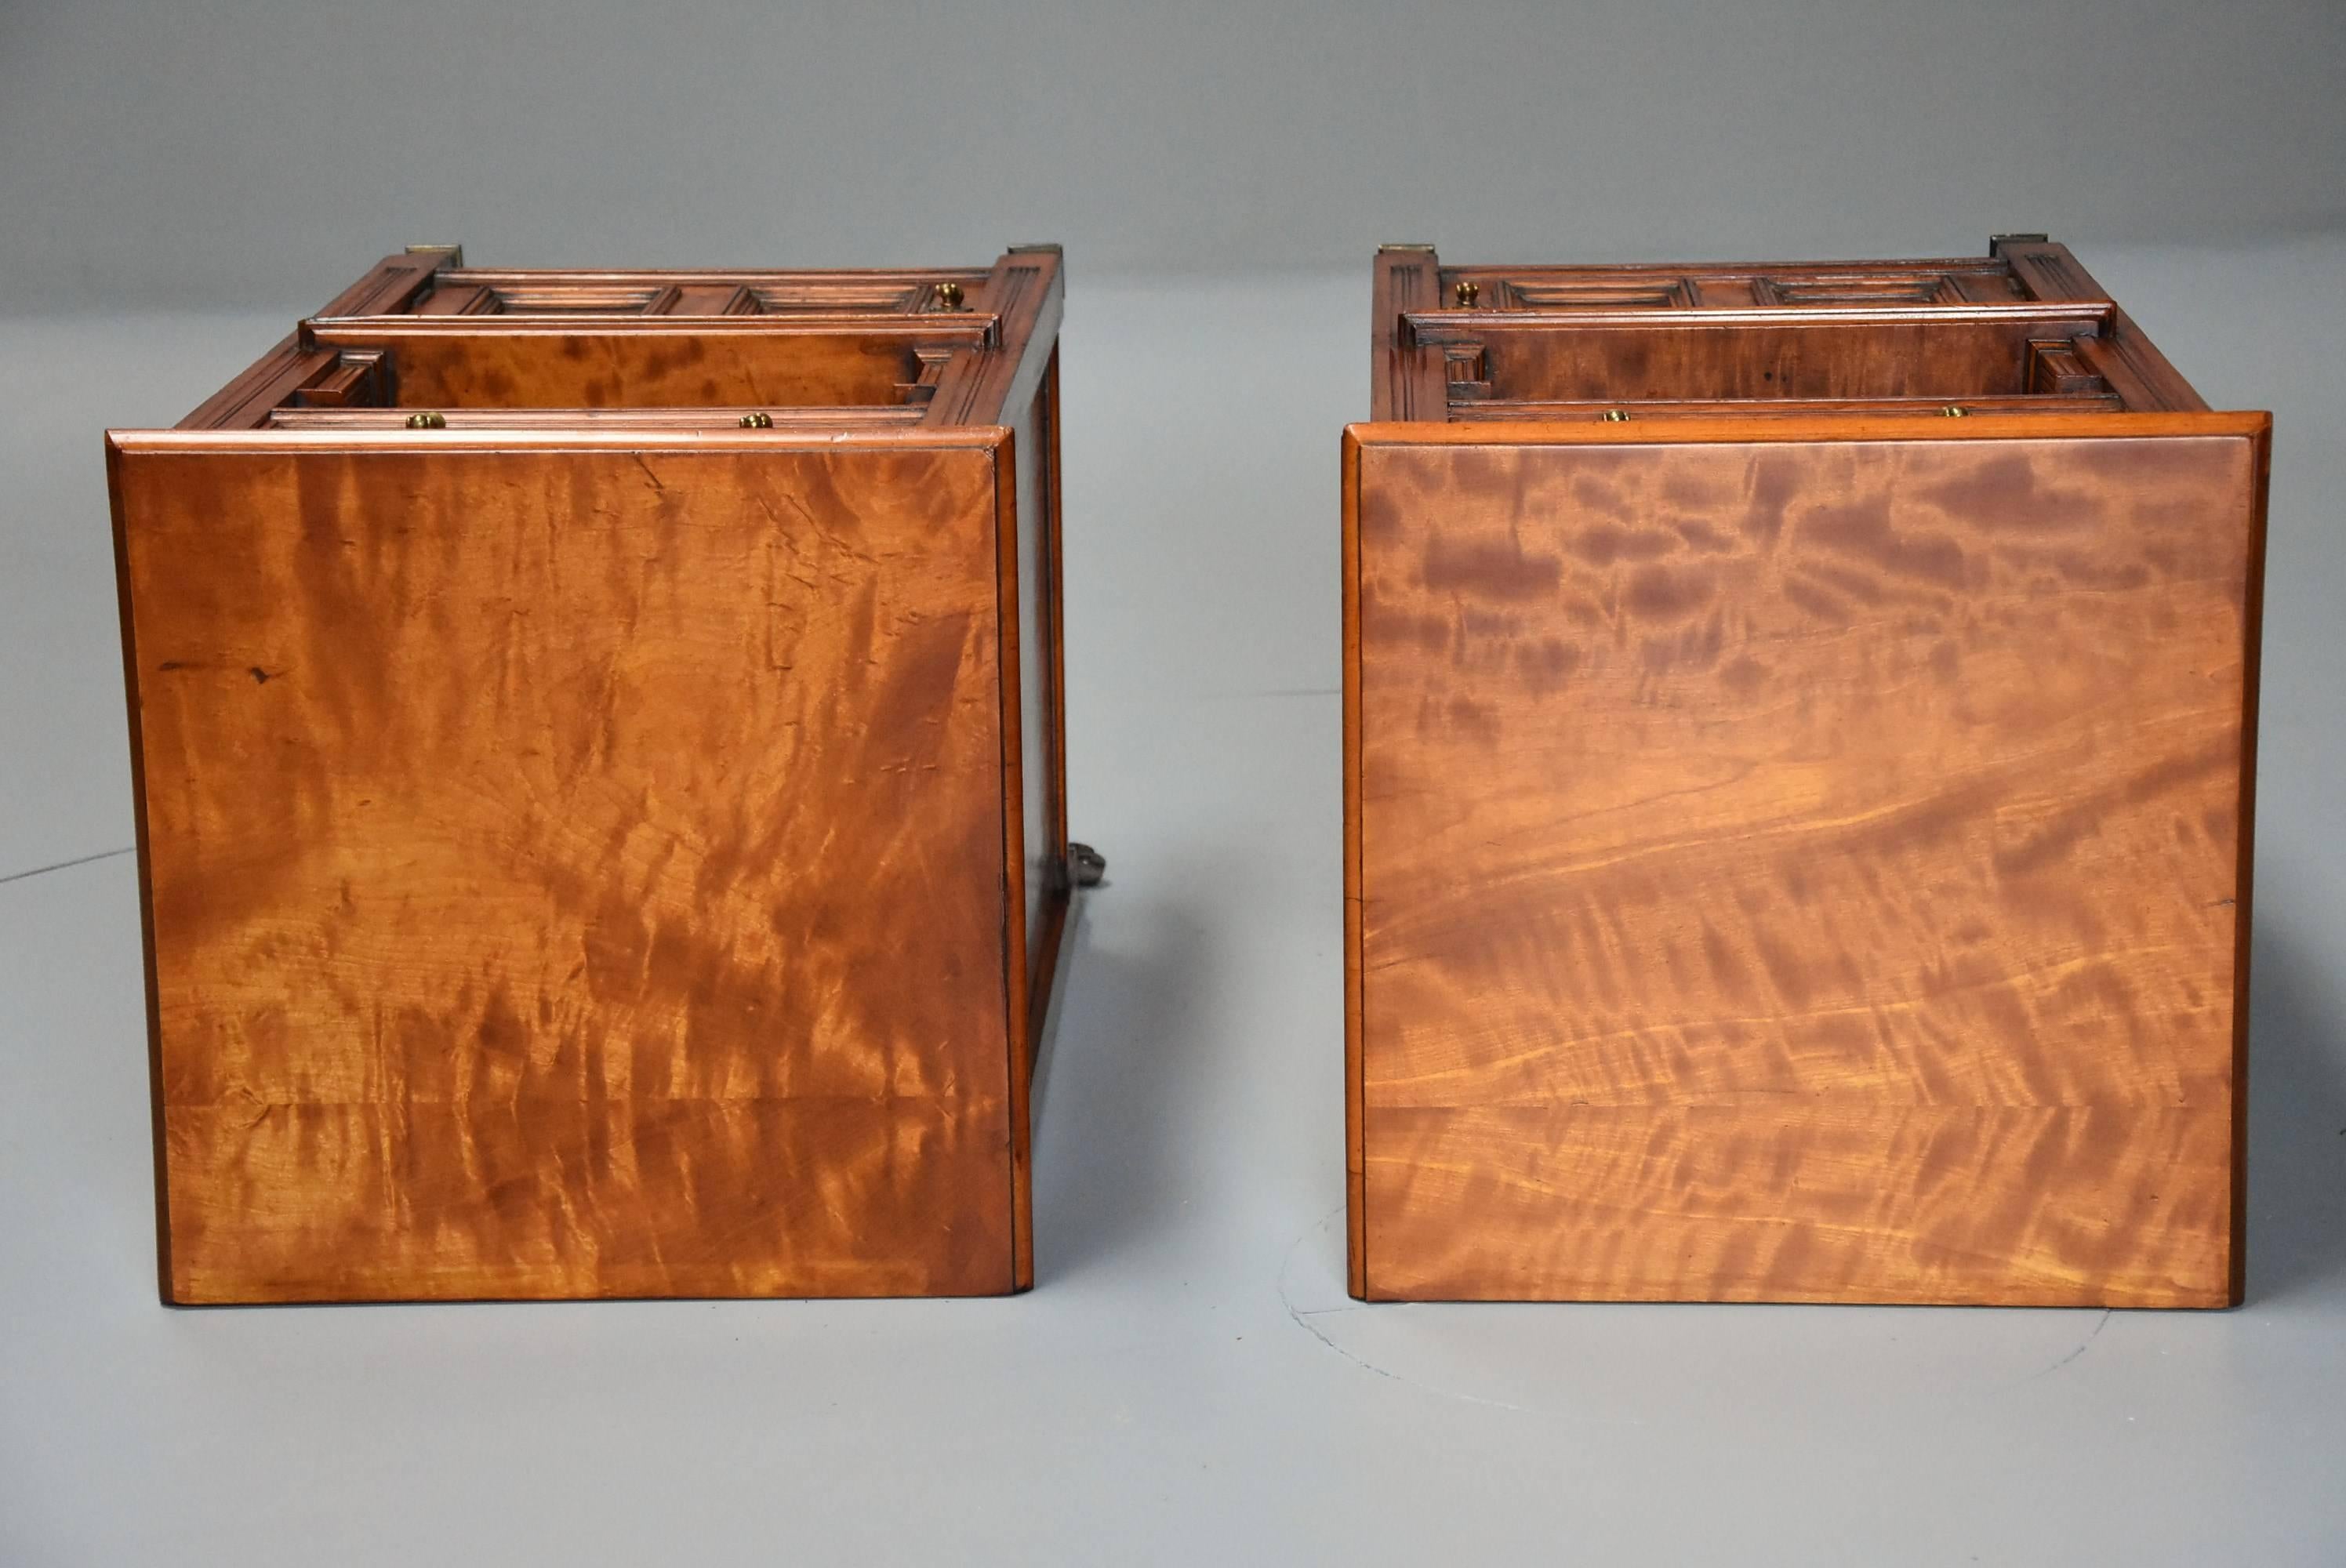 Pair of Late 19th Century Satin Birch Bedside Cabinets with Aesthetic Influence 5